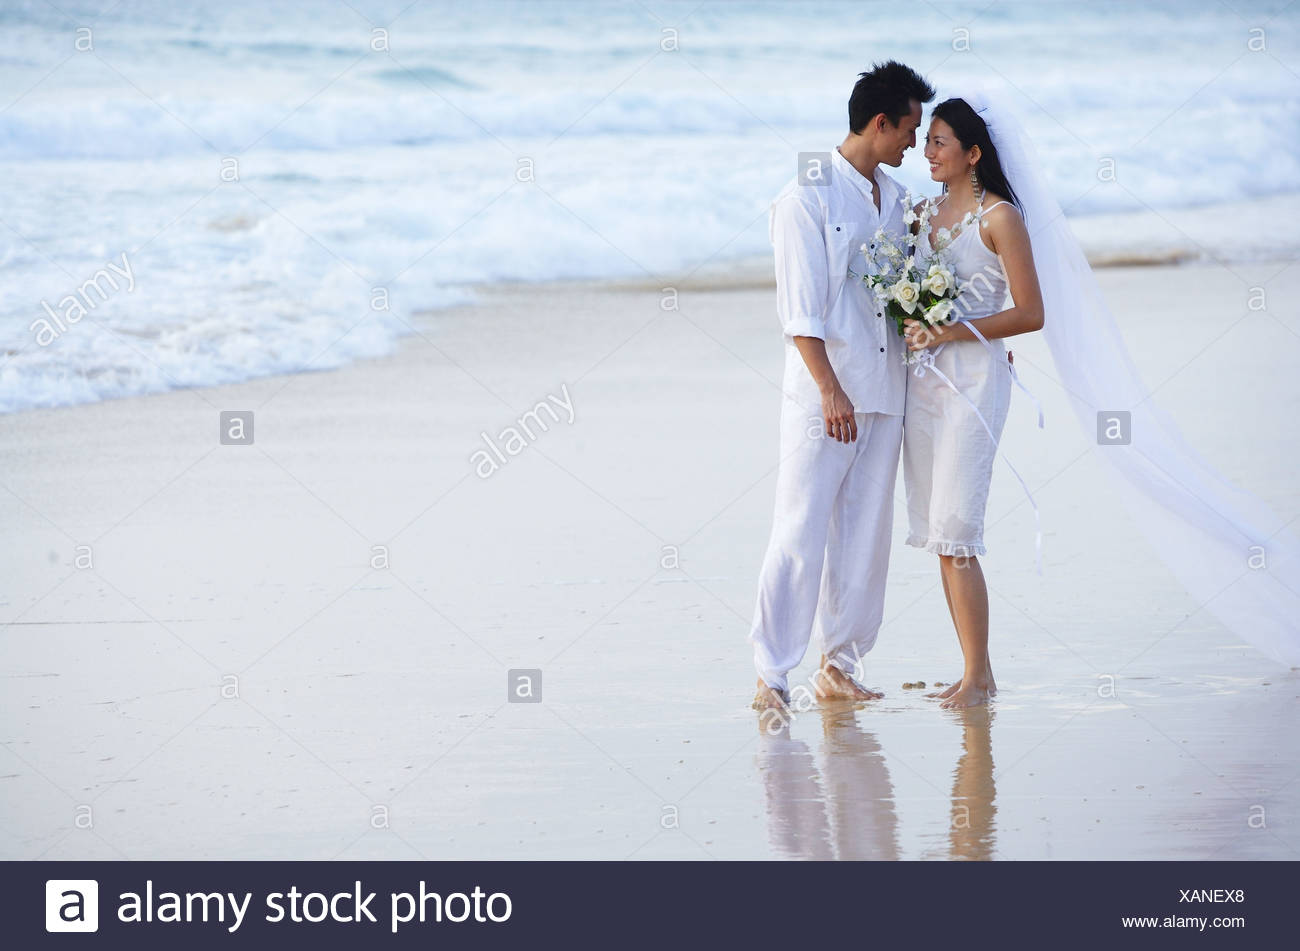 Bride And Groom On Beach Standing Face To Face Stock Photo